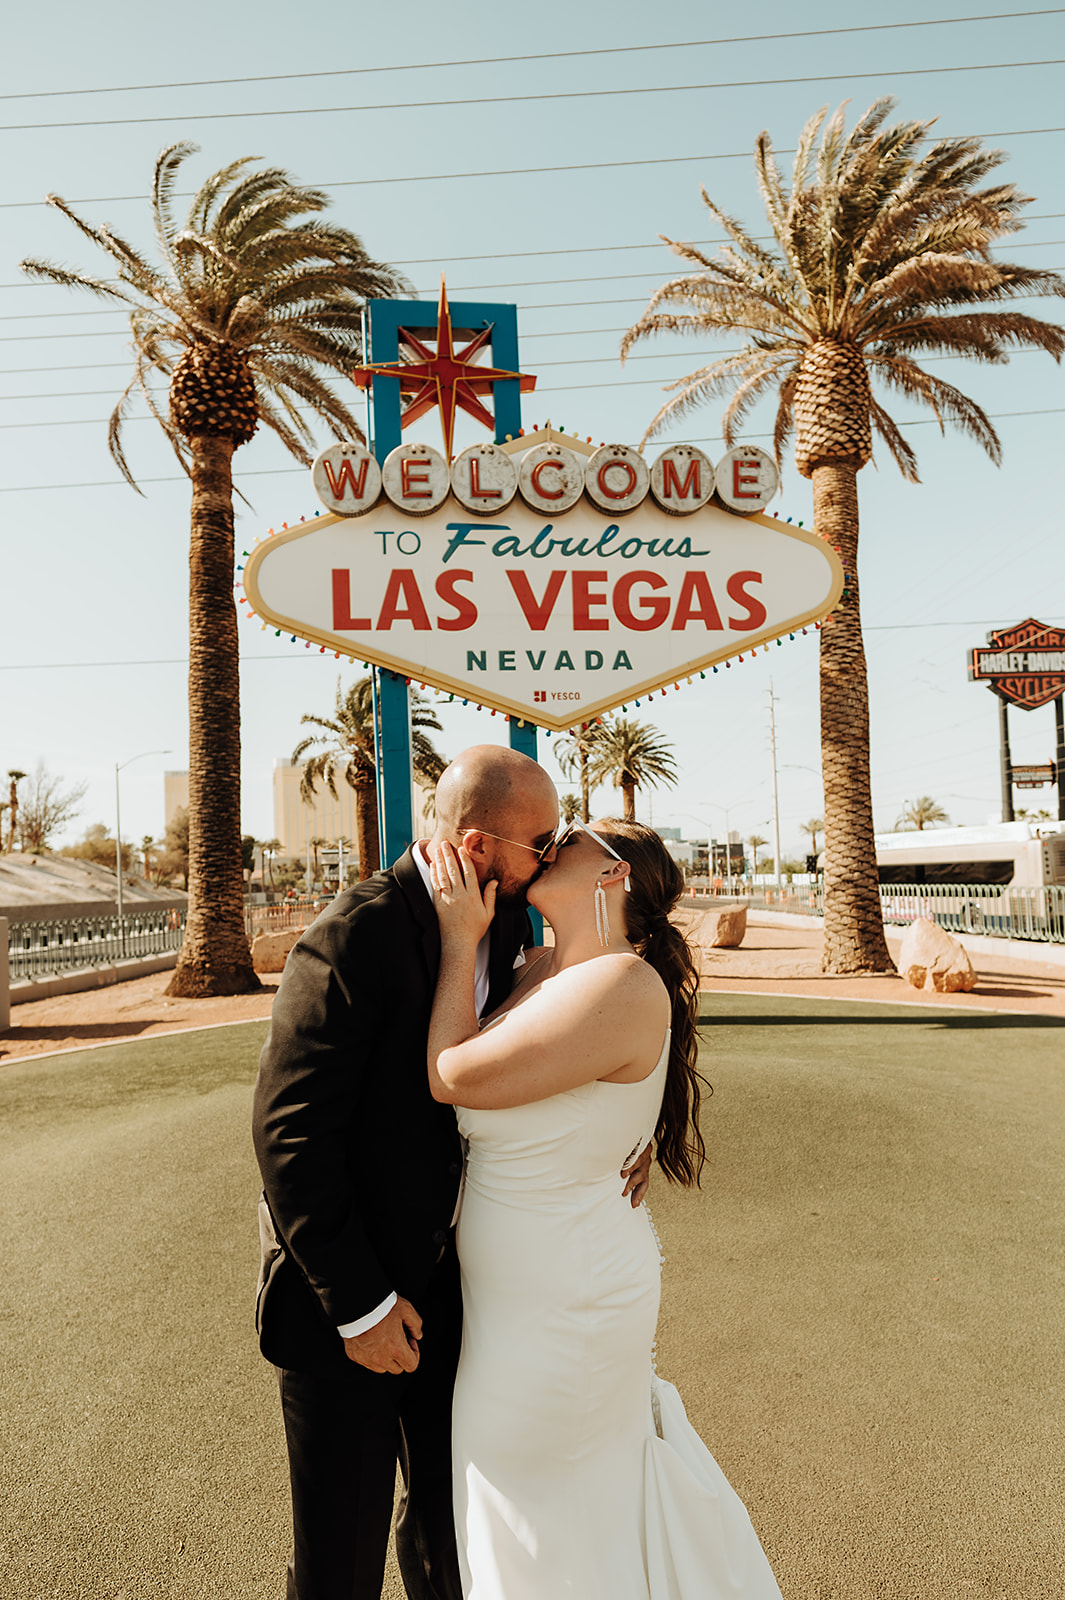 Bride and groom share a kiss in front of Las Vegas sign for their wedding shoot